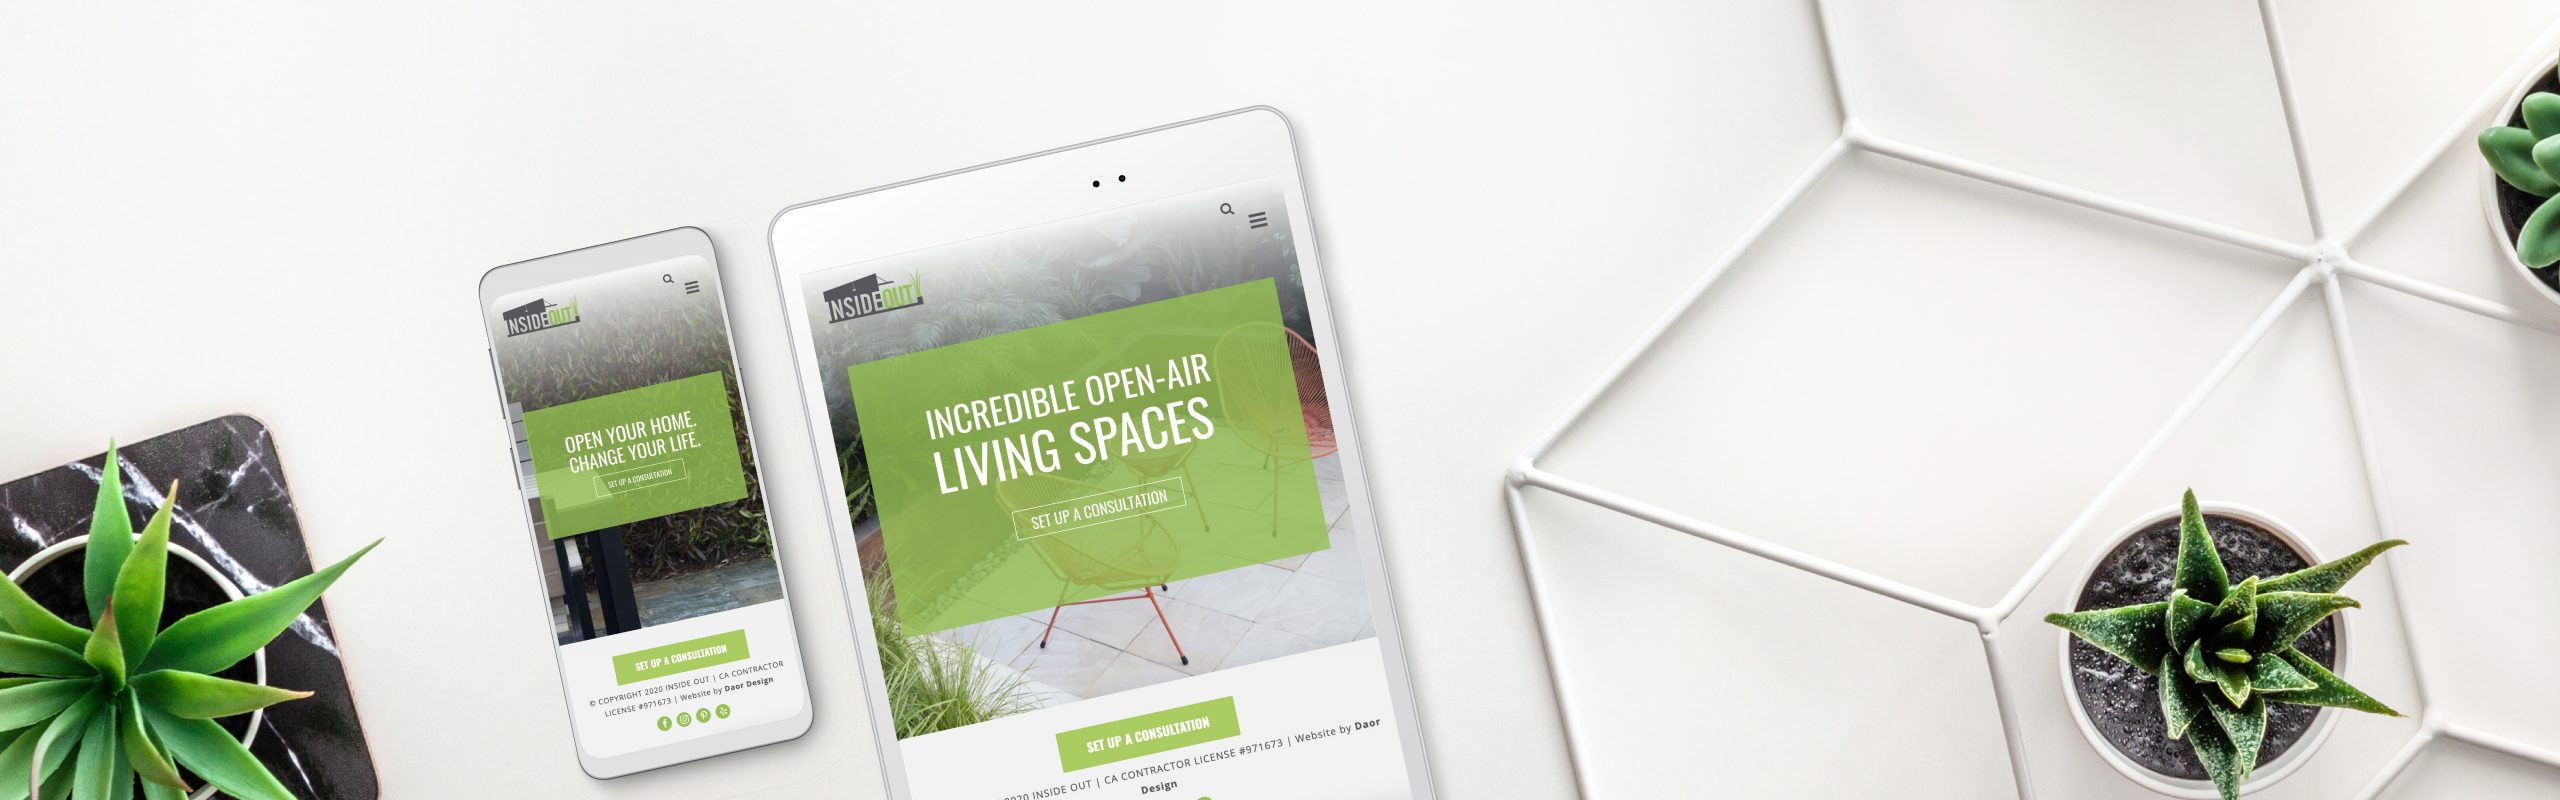 Two digital tablets displaying a website with an "Inside Out" green theme about living spaces, positioned on a white surface surrounded by small potted plants.